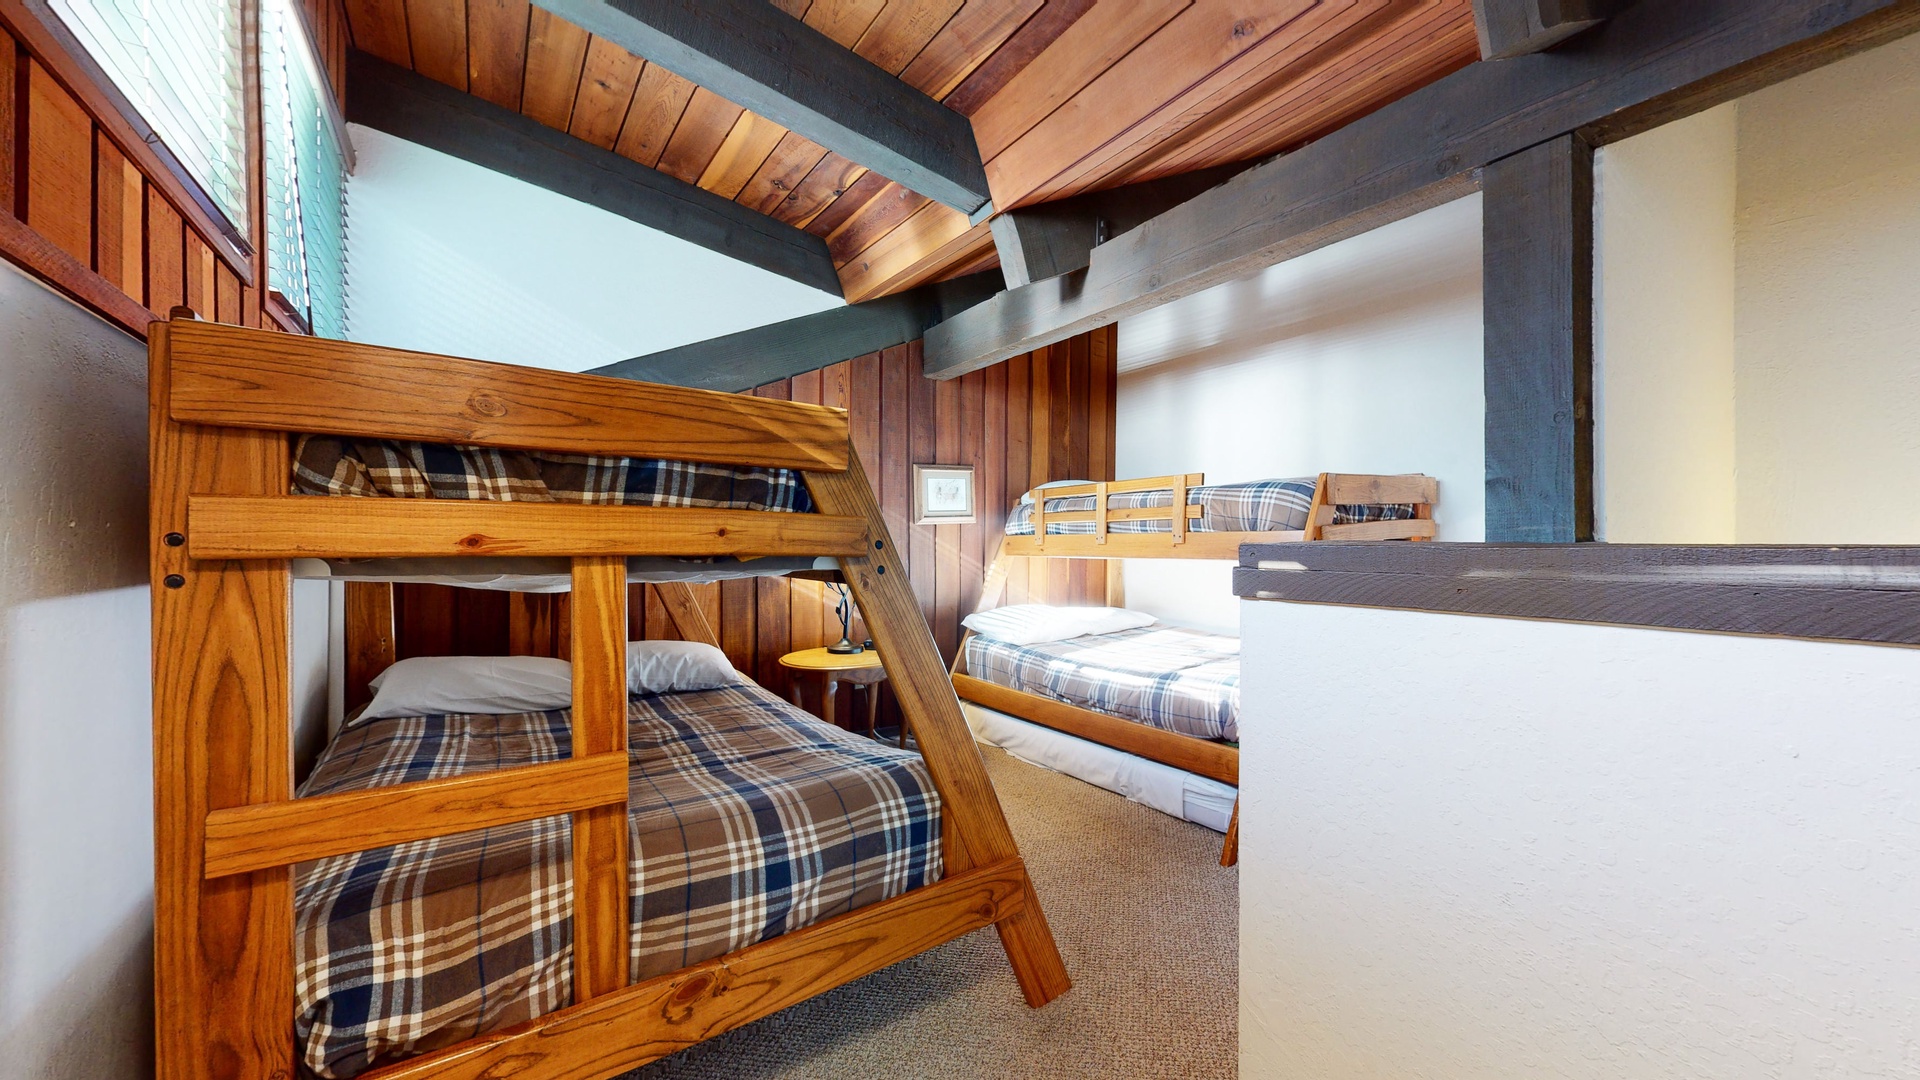 Loft: Twin over Full bunk beds, great for kids